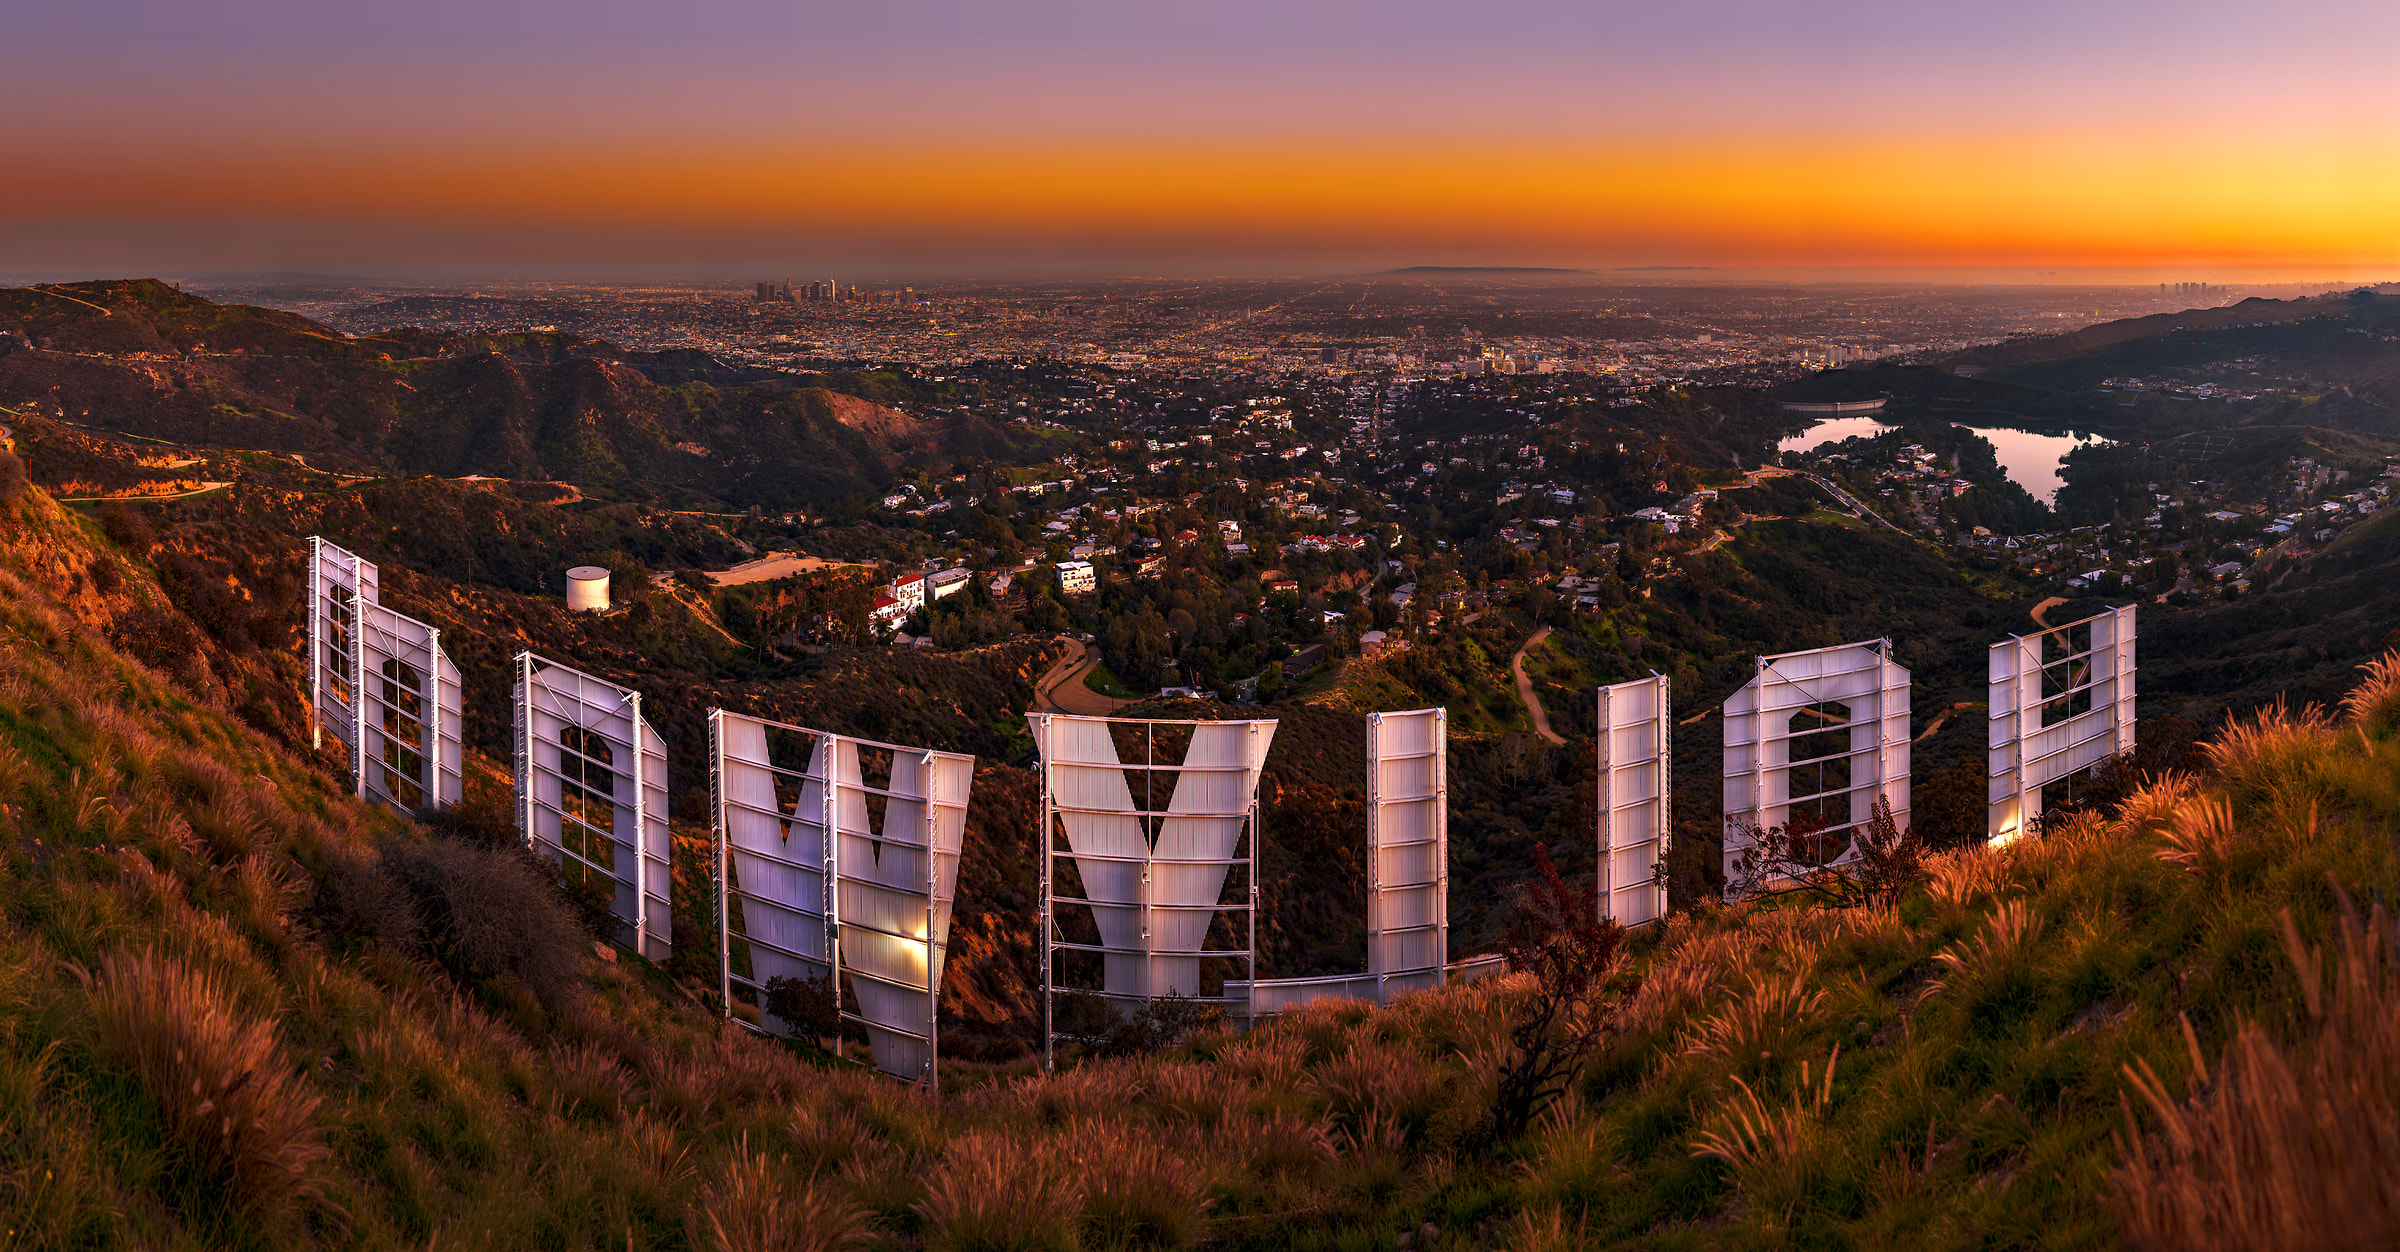 737 megapixels! A very high resolution, large-format VAST photo print of the Hollywood Sign from behind at sunset with the city in the background; cityscape fine art photograph created by Tim Shields in Hollywood, California, USA.